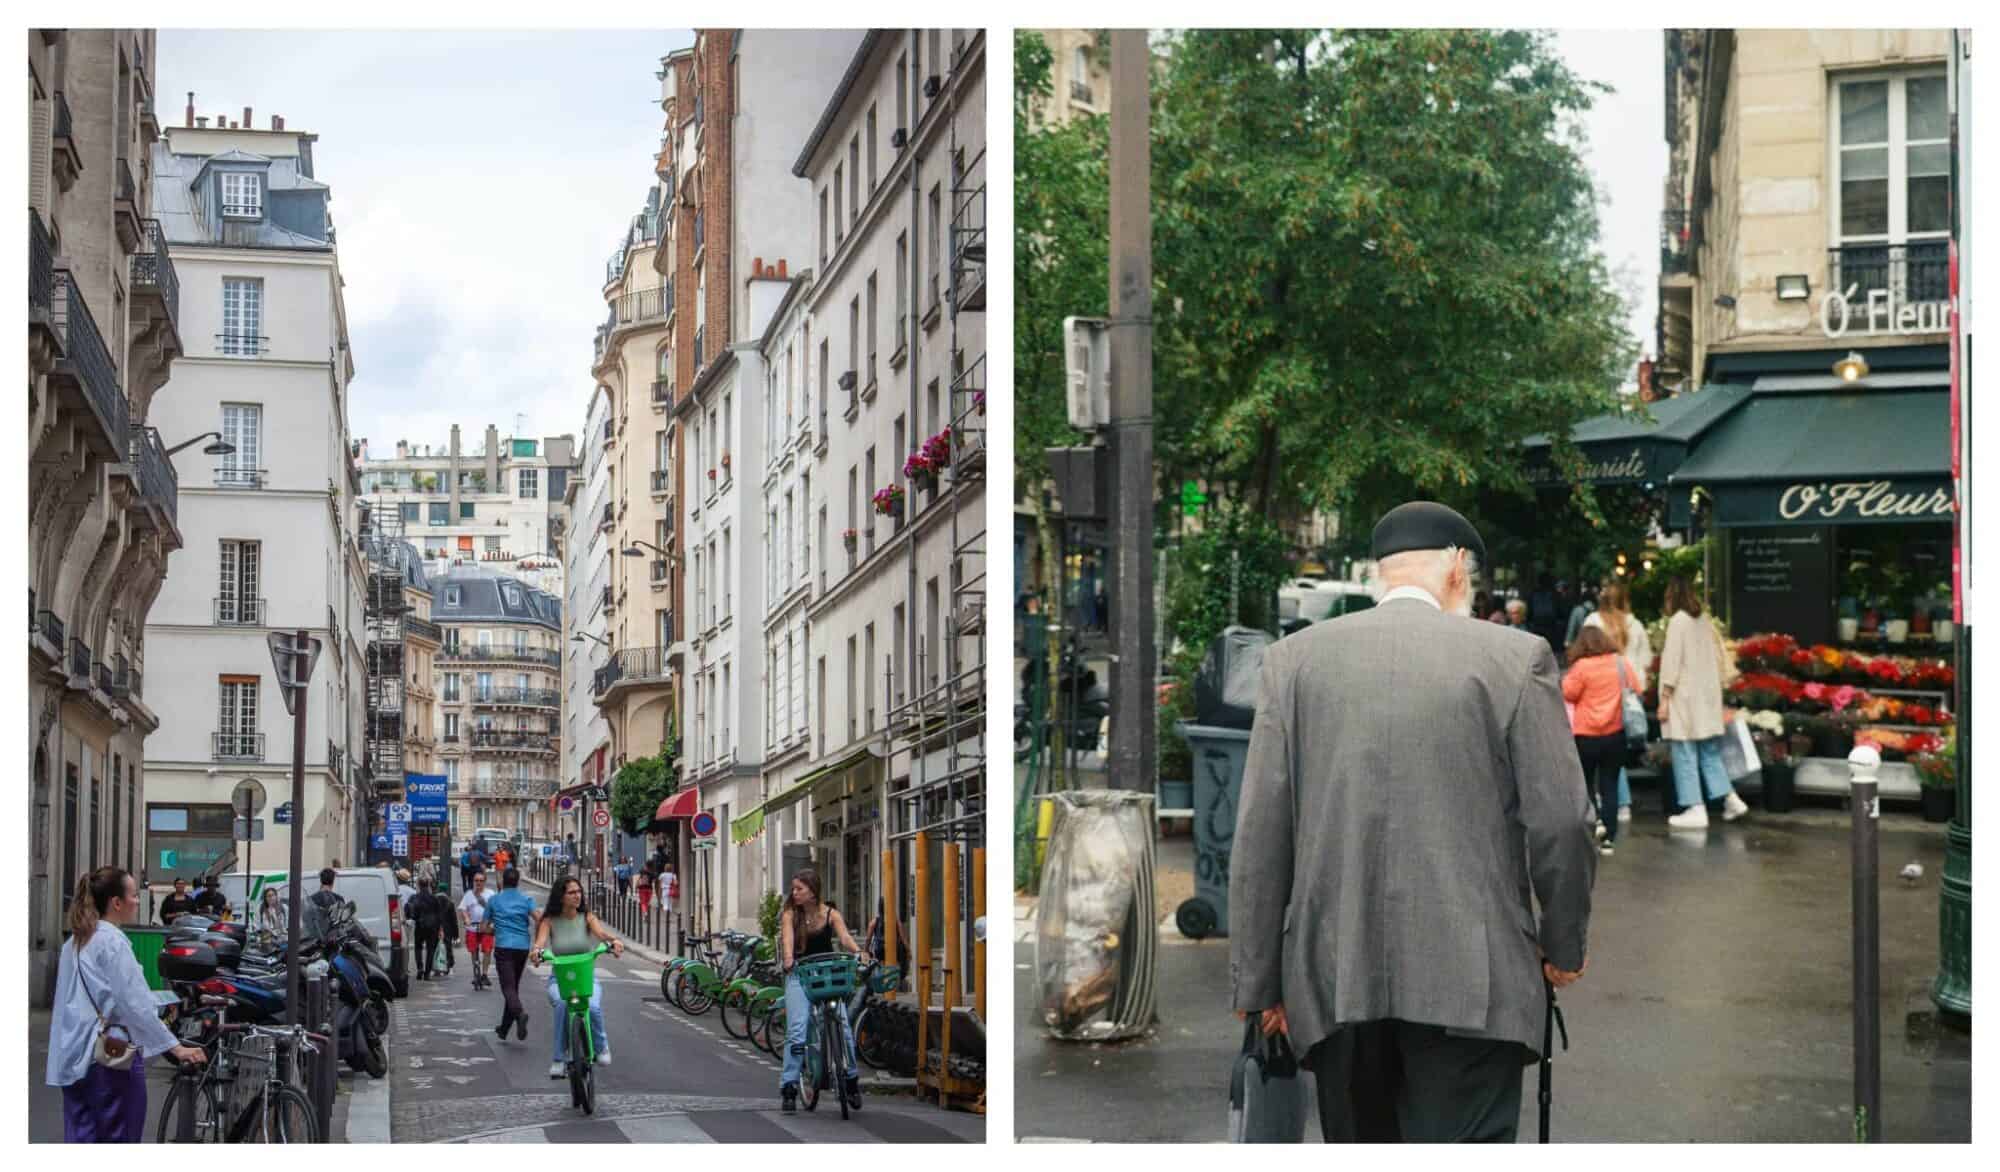 Left: Parisian street life, with people riding bikes and walking on the City streets; Right: An older man in a gray jacket and black hat crosses a Paris street towards a cafe with a green awning. 